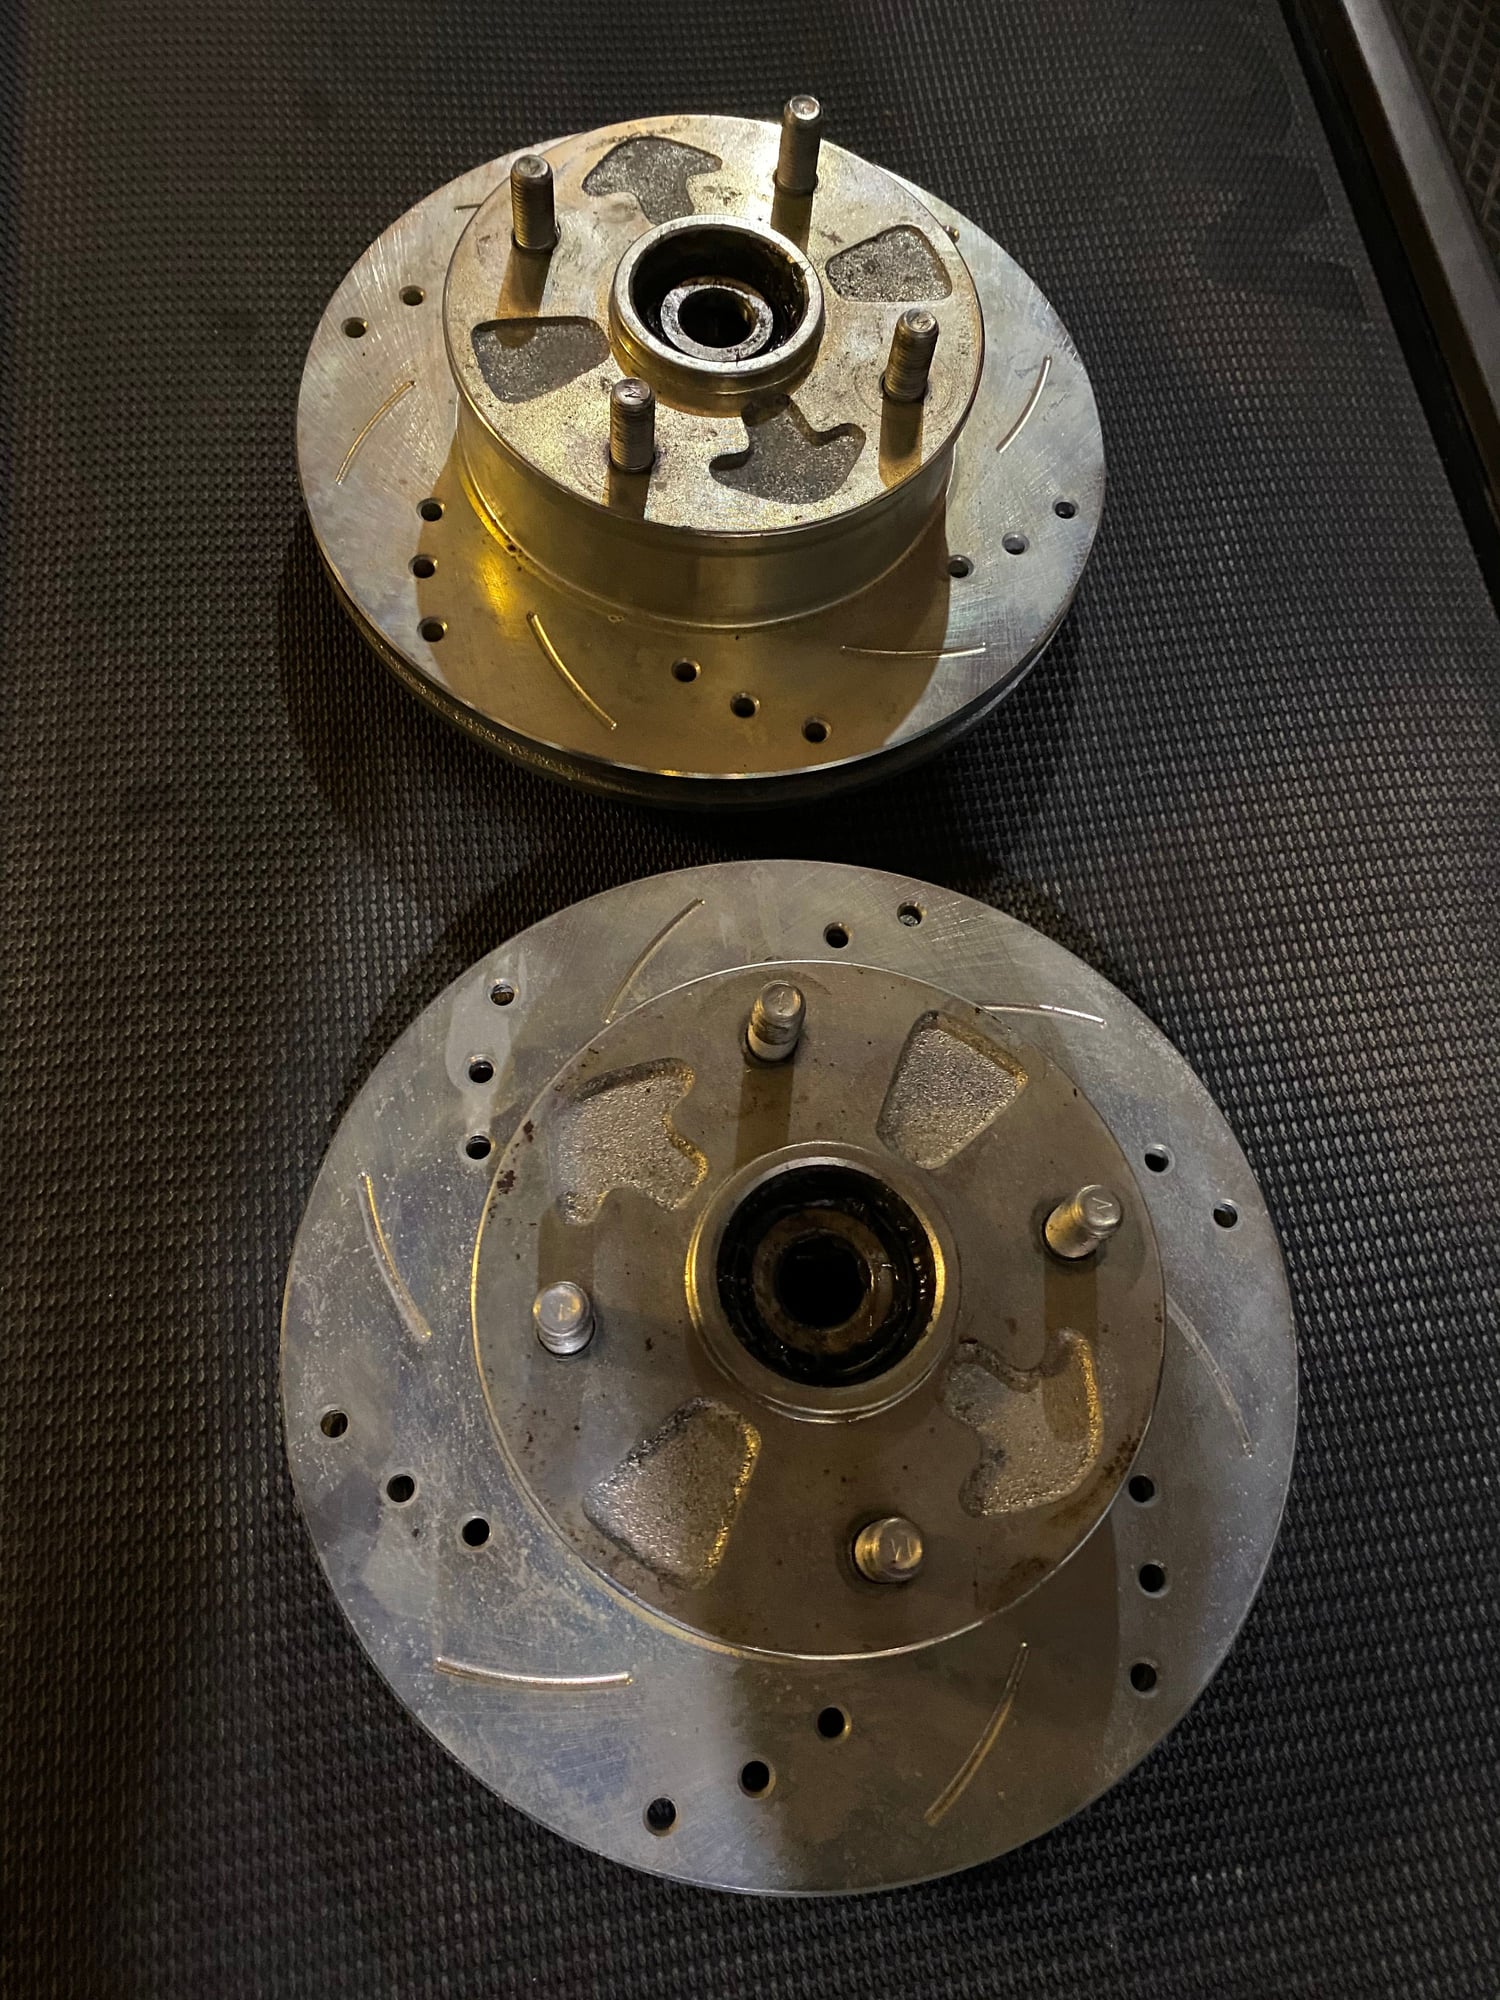 Brakes - FB gslse crossed-drilled/ slotted rotors - Used - 1979 to 1985 Mazda RX-7 - Smiths Falls, ON K7A5J4, Canada